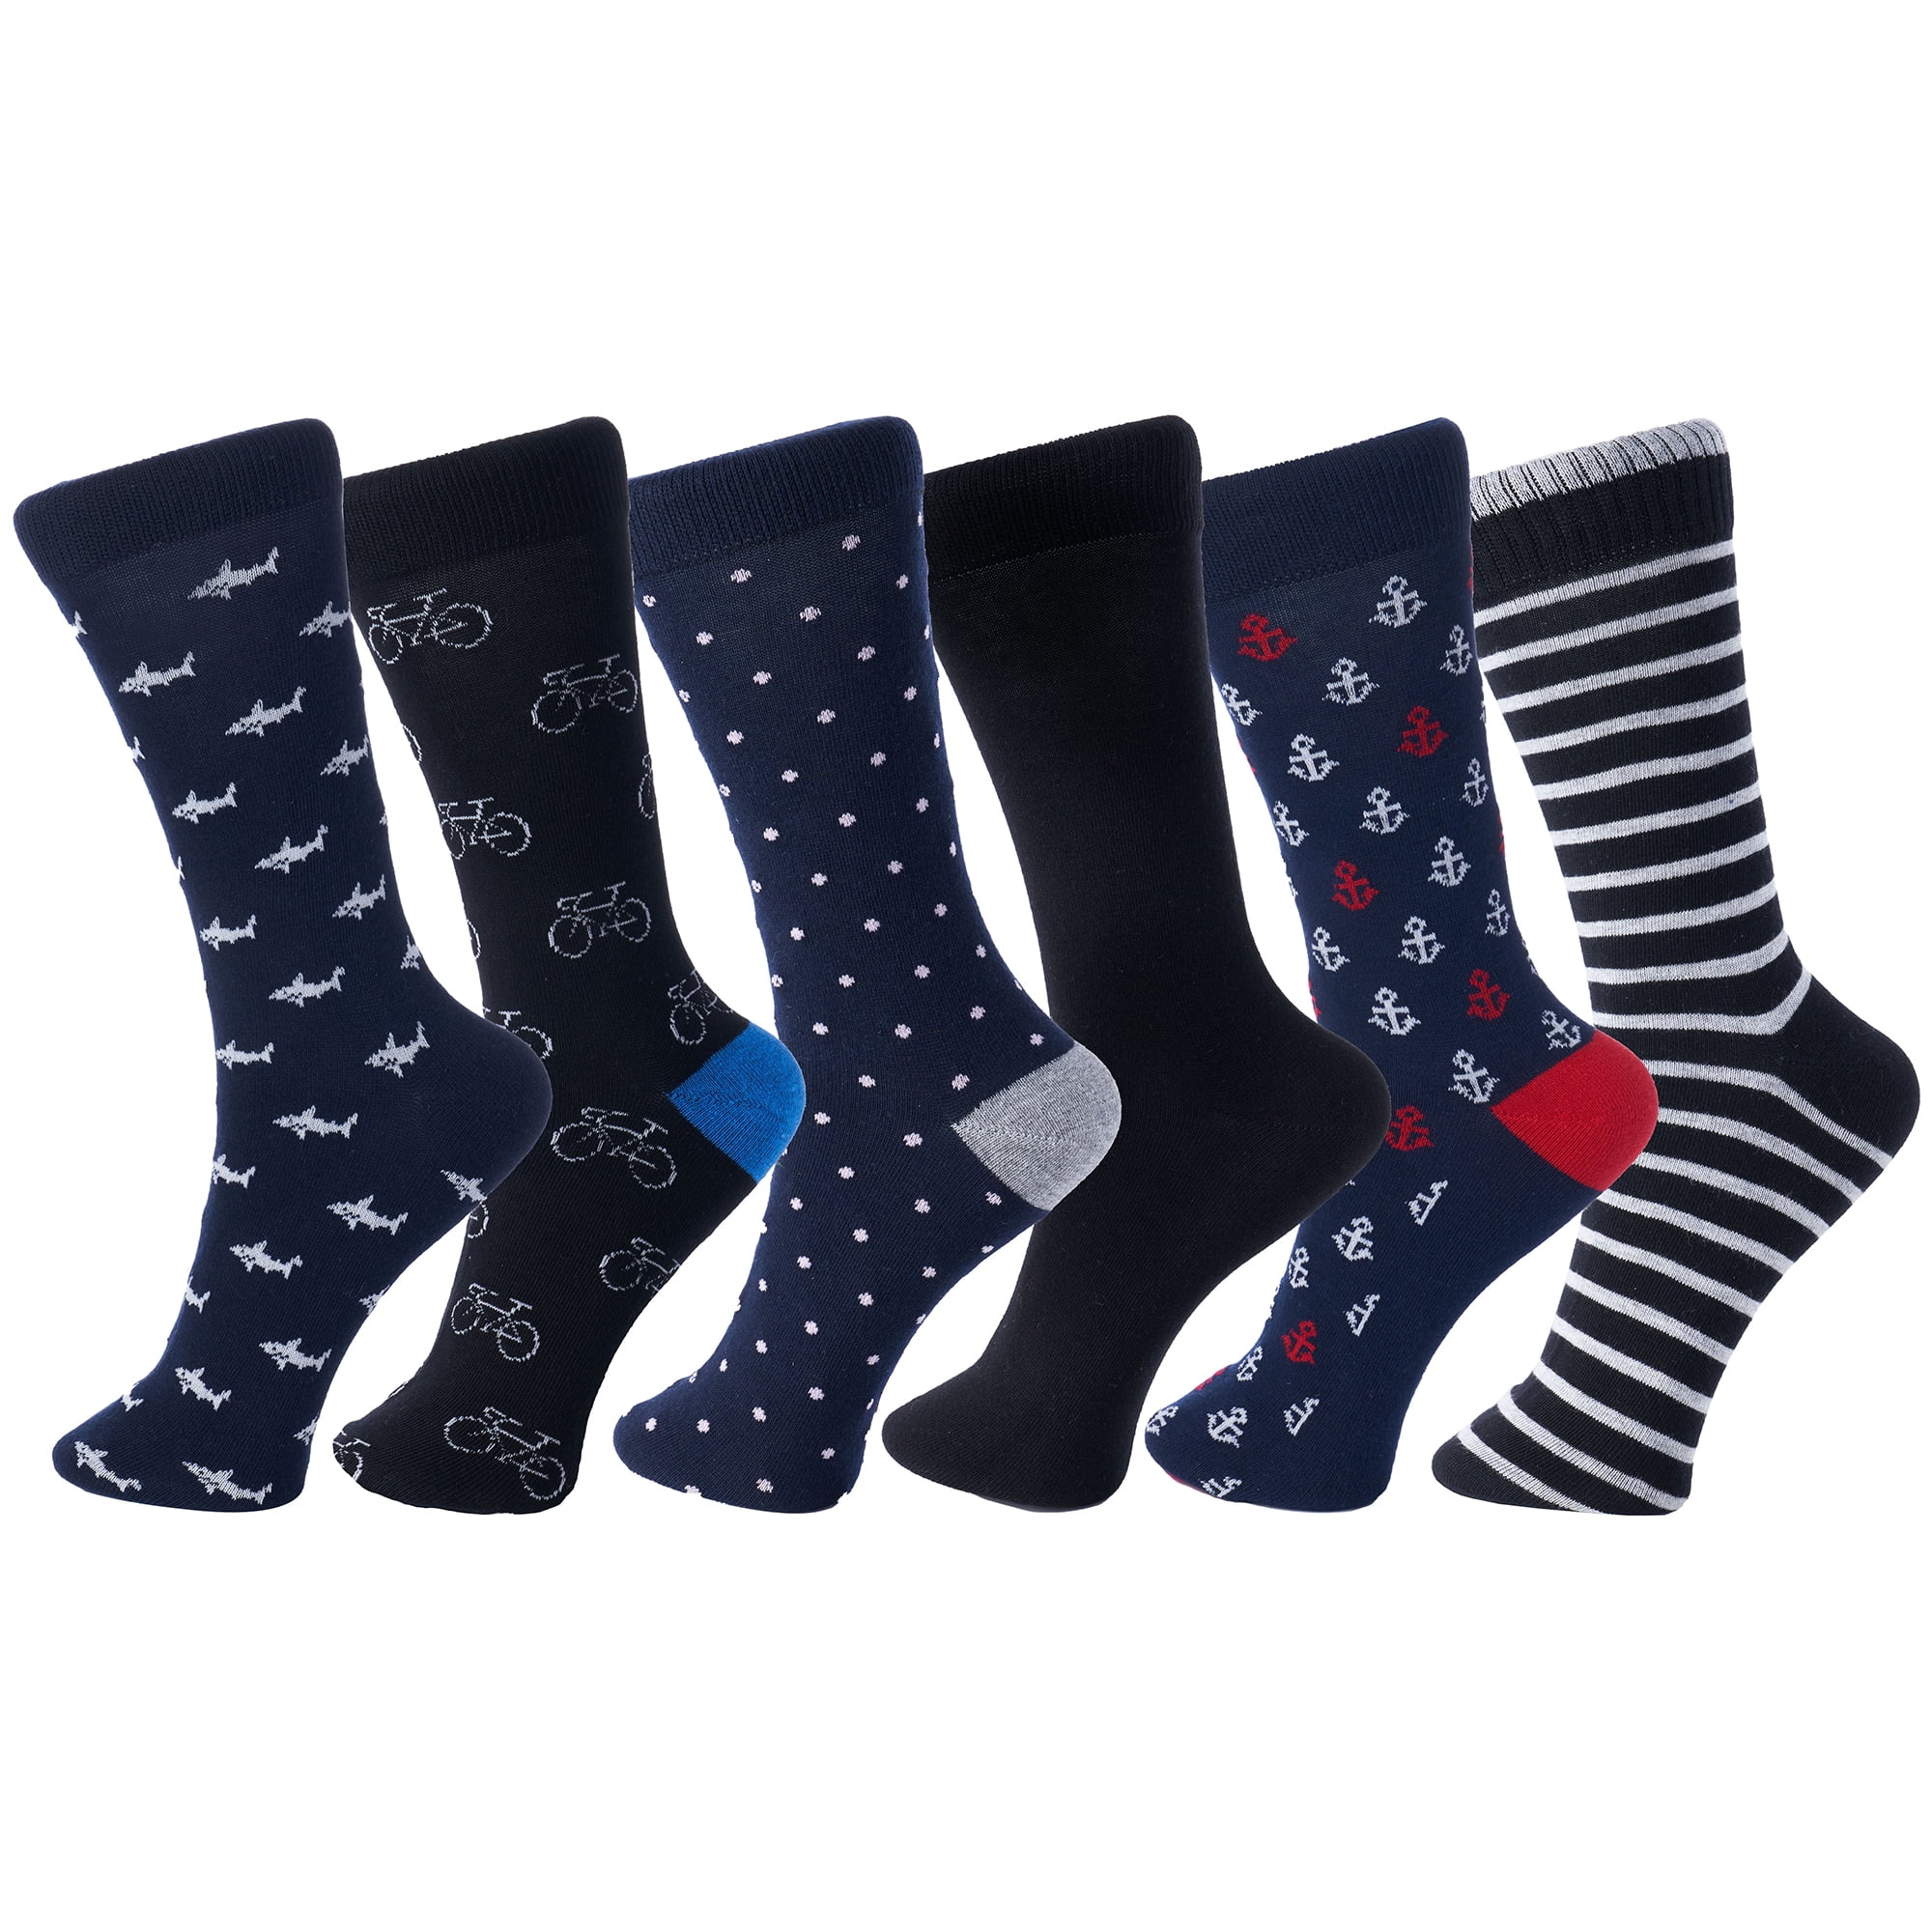 Middle Stocking Super Soft Dress Socks Comfortable Classic Crew Sock Black Solid & Rib Design and Color Patterns 